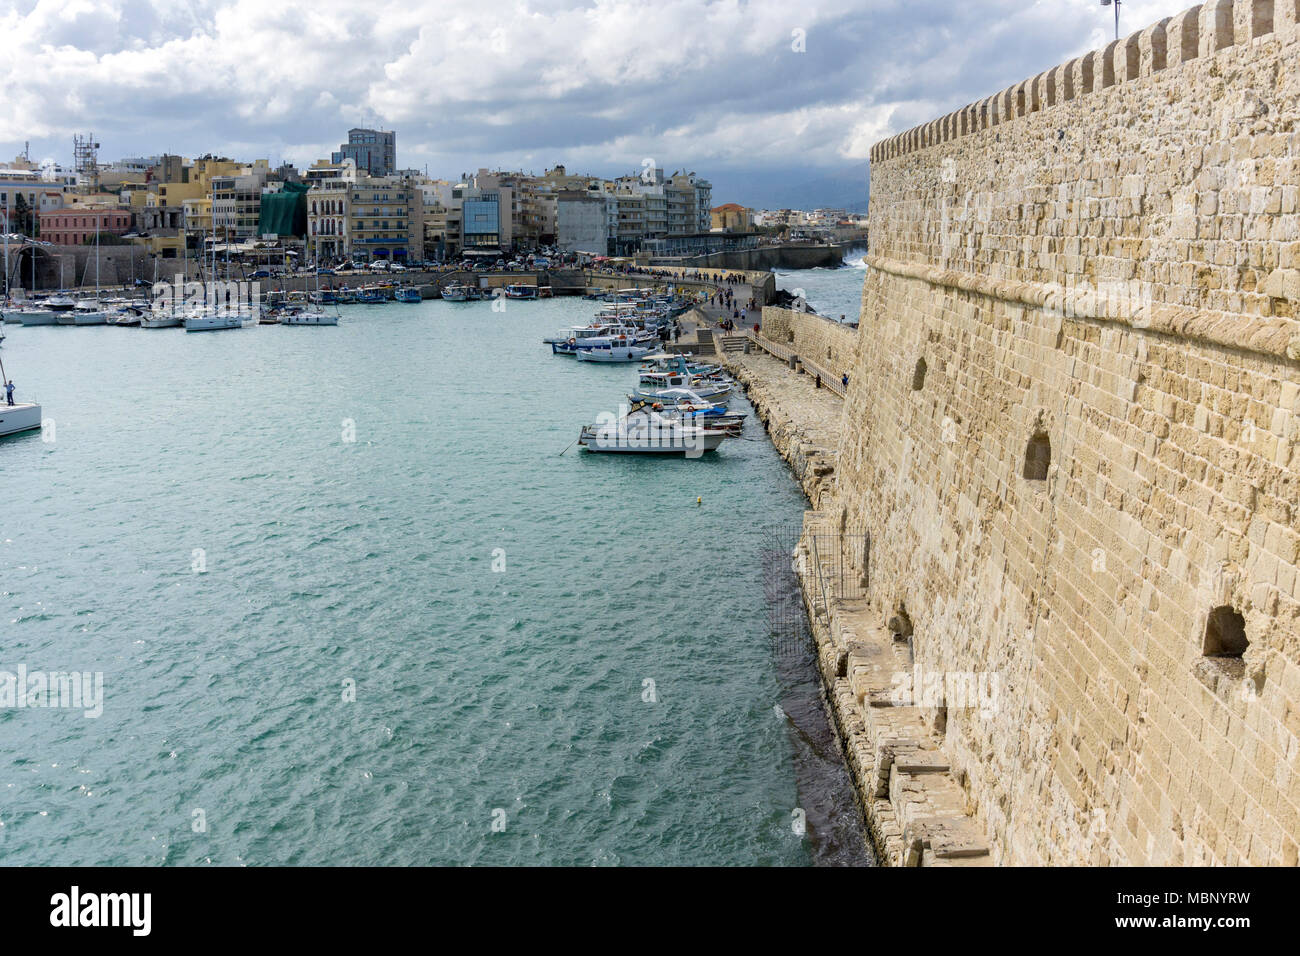 Heraklion, Crete Island - Greece. Panoramic view of Heraklion city, from the Venetian fortress 'Koules' (castello a mare) Stock Photo